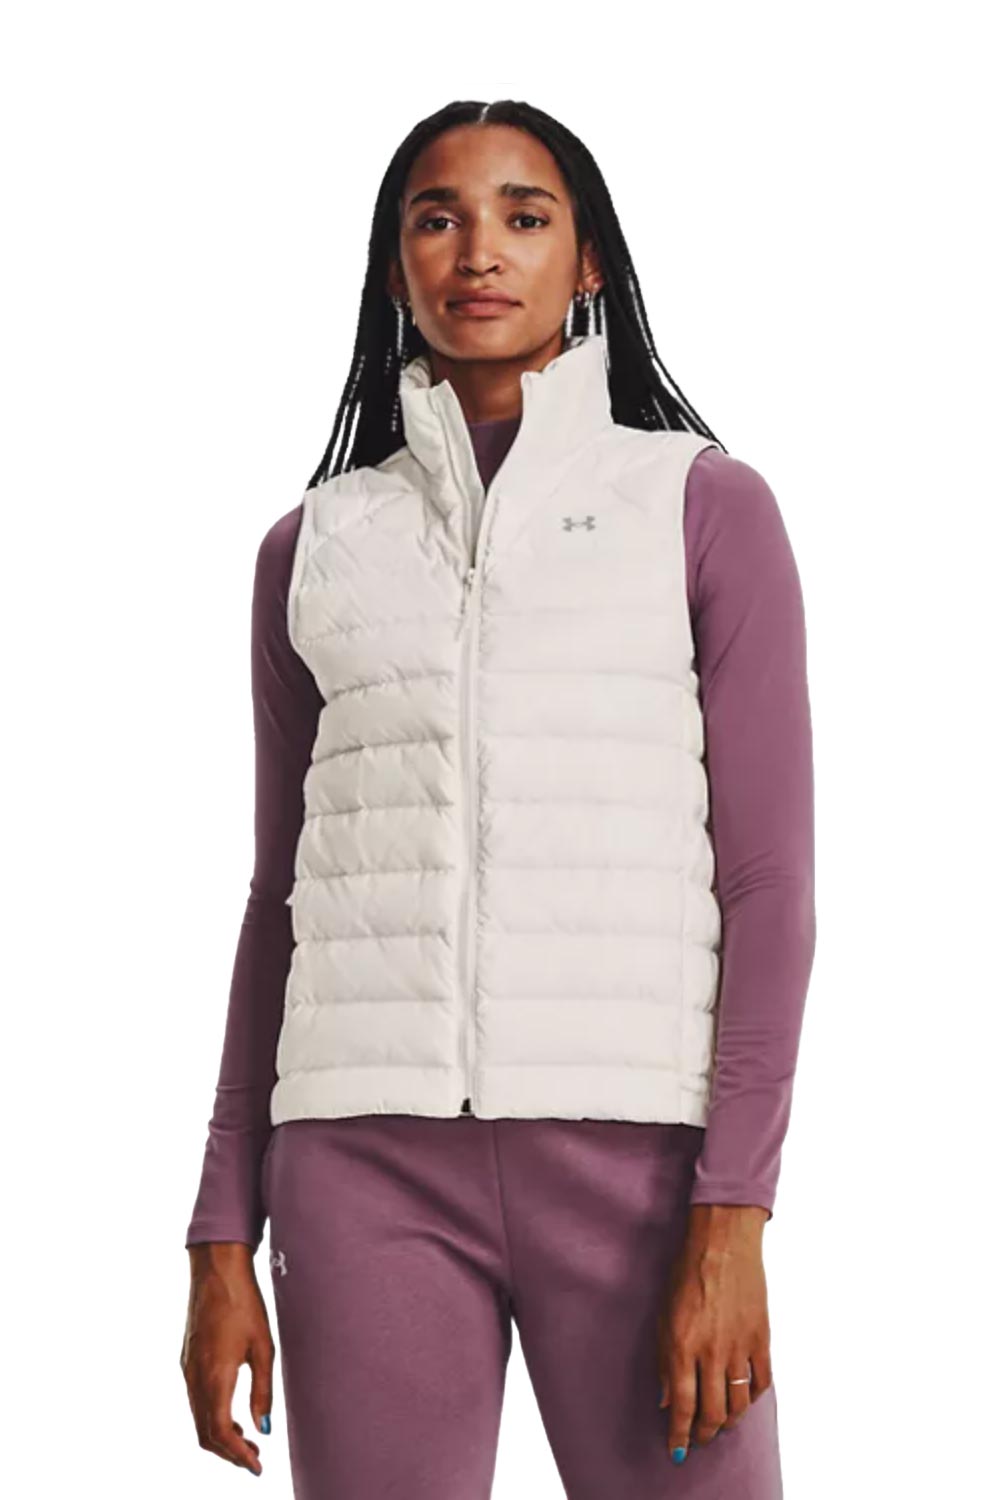 women's Under Armour storm puffy vest, off white